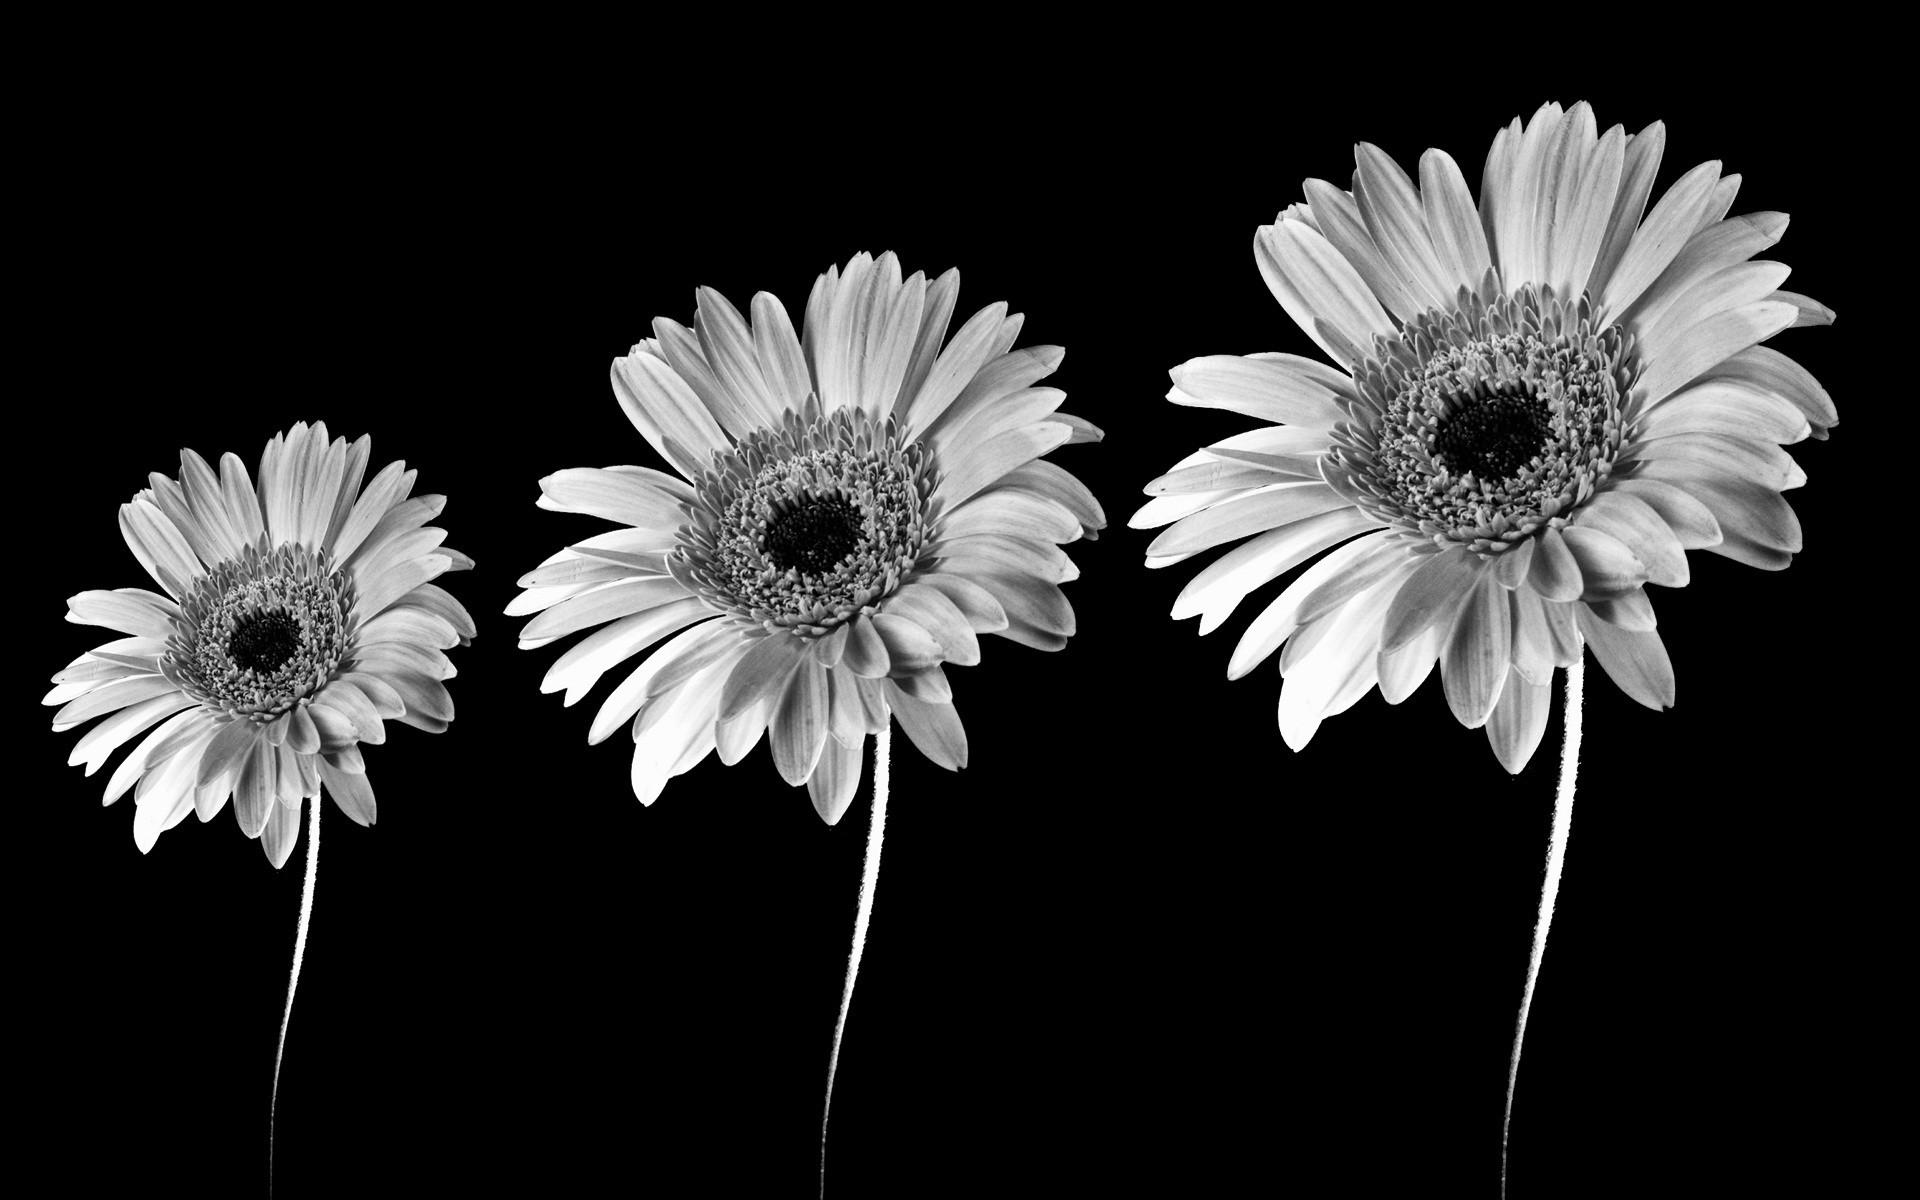 Black And White Images Of Flowers 9 Background - Sunflower Black And White , HD Wallpaper & Backgrounds